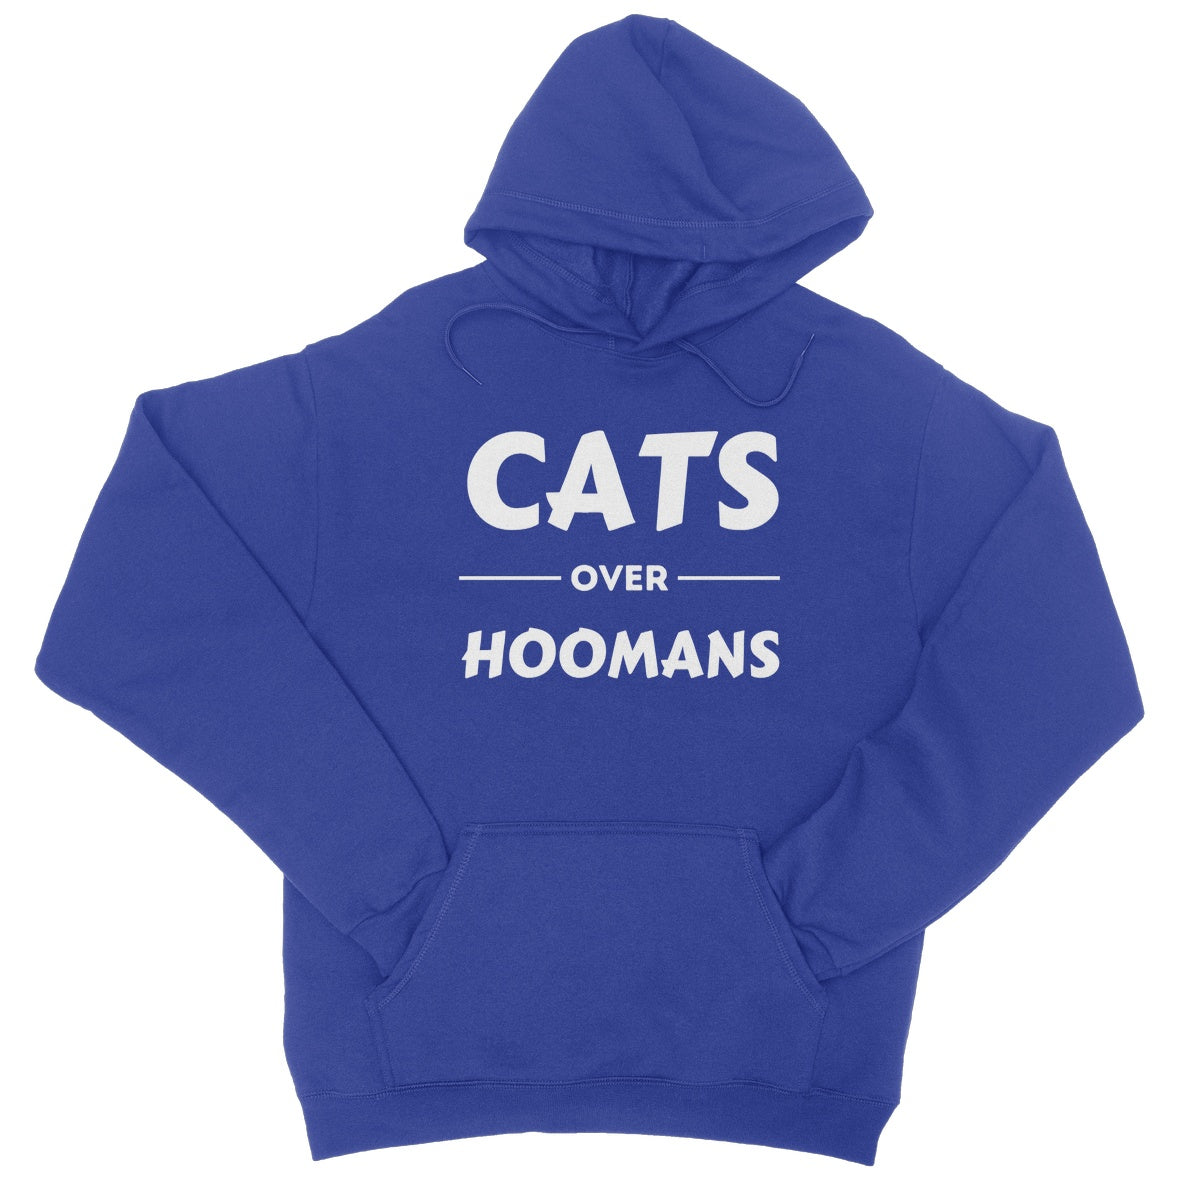 cats over hoomans hoodie blue